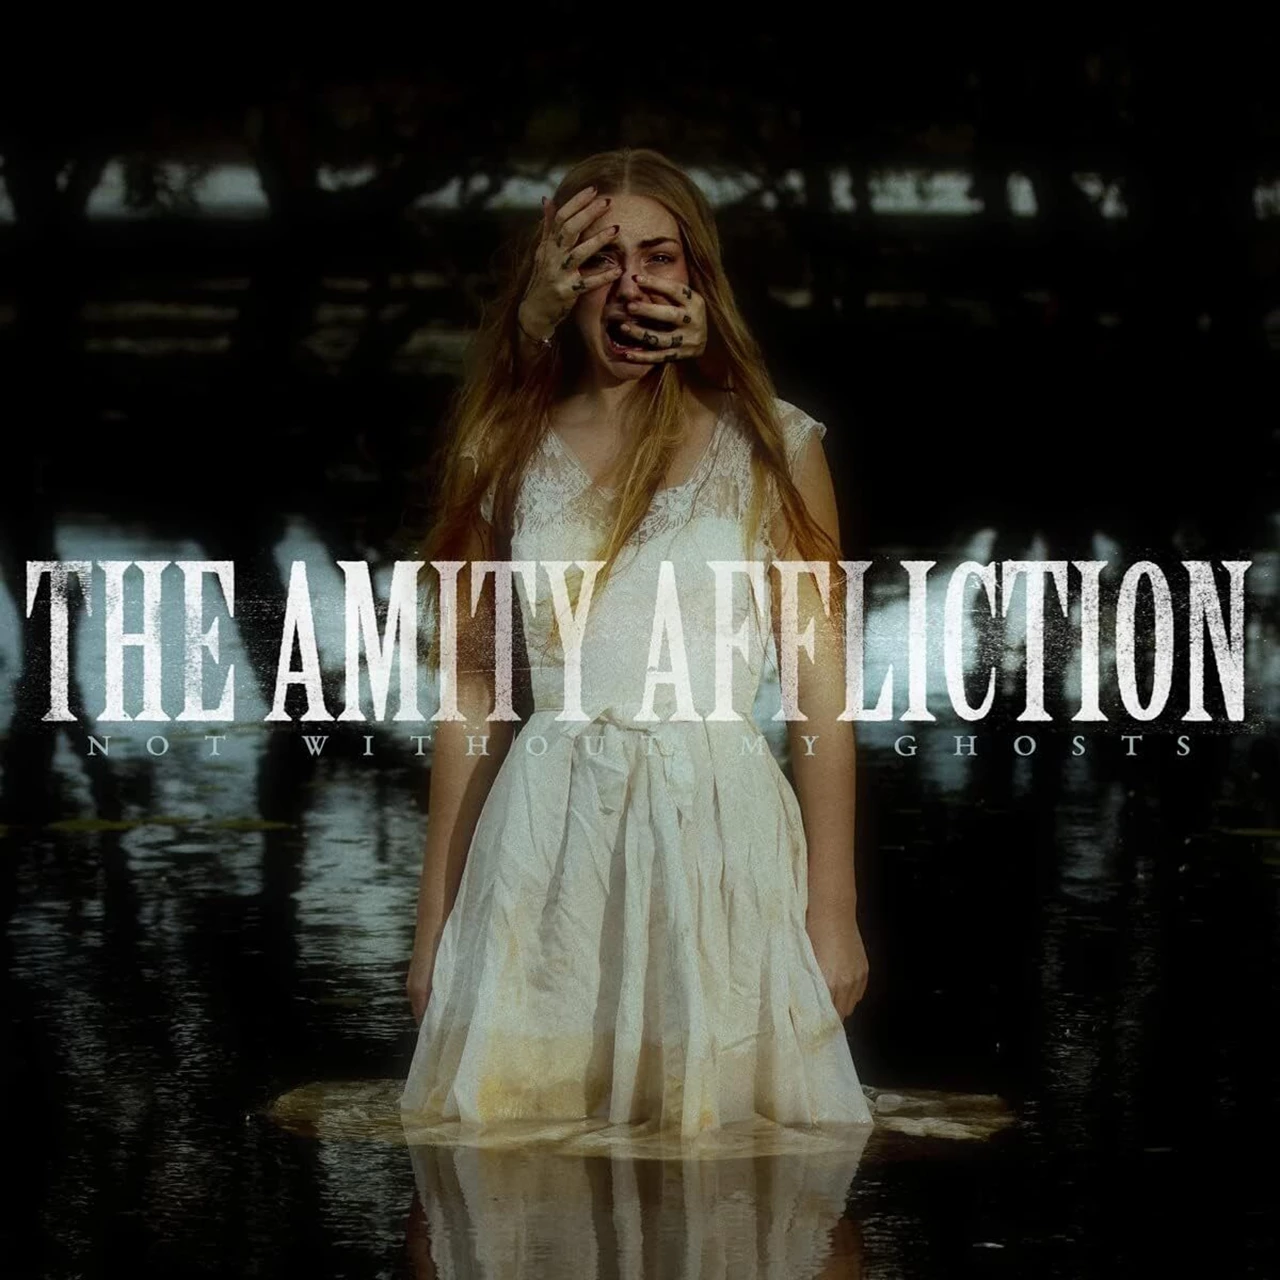 Not Without My Ghosts by The Amity Affliction